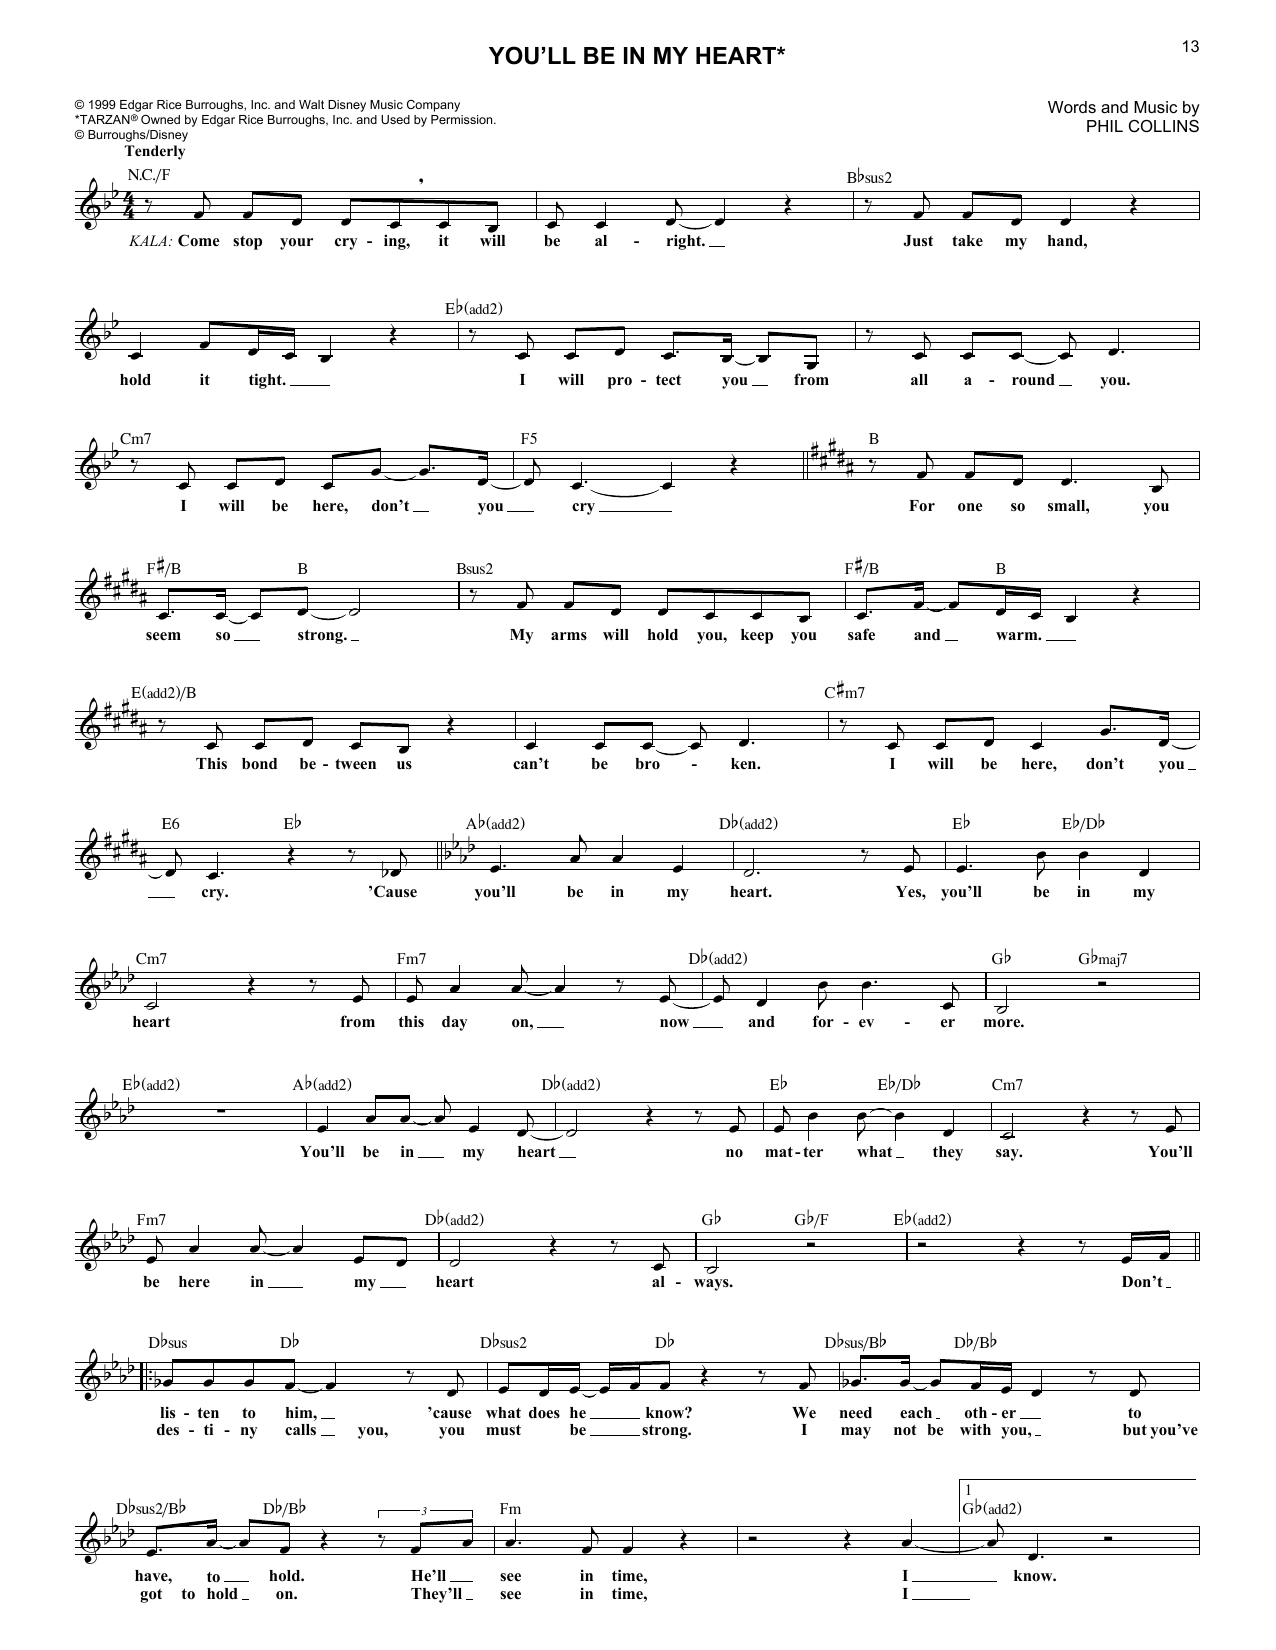 Download Phil Collins You'll Be In My Heart Sheet Music